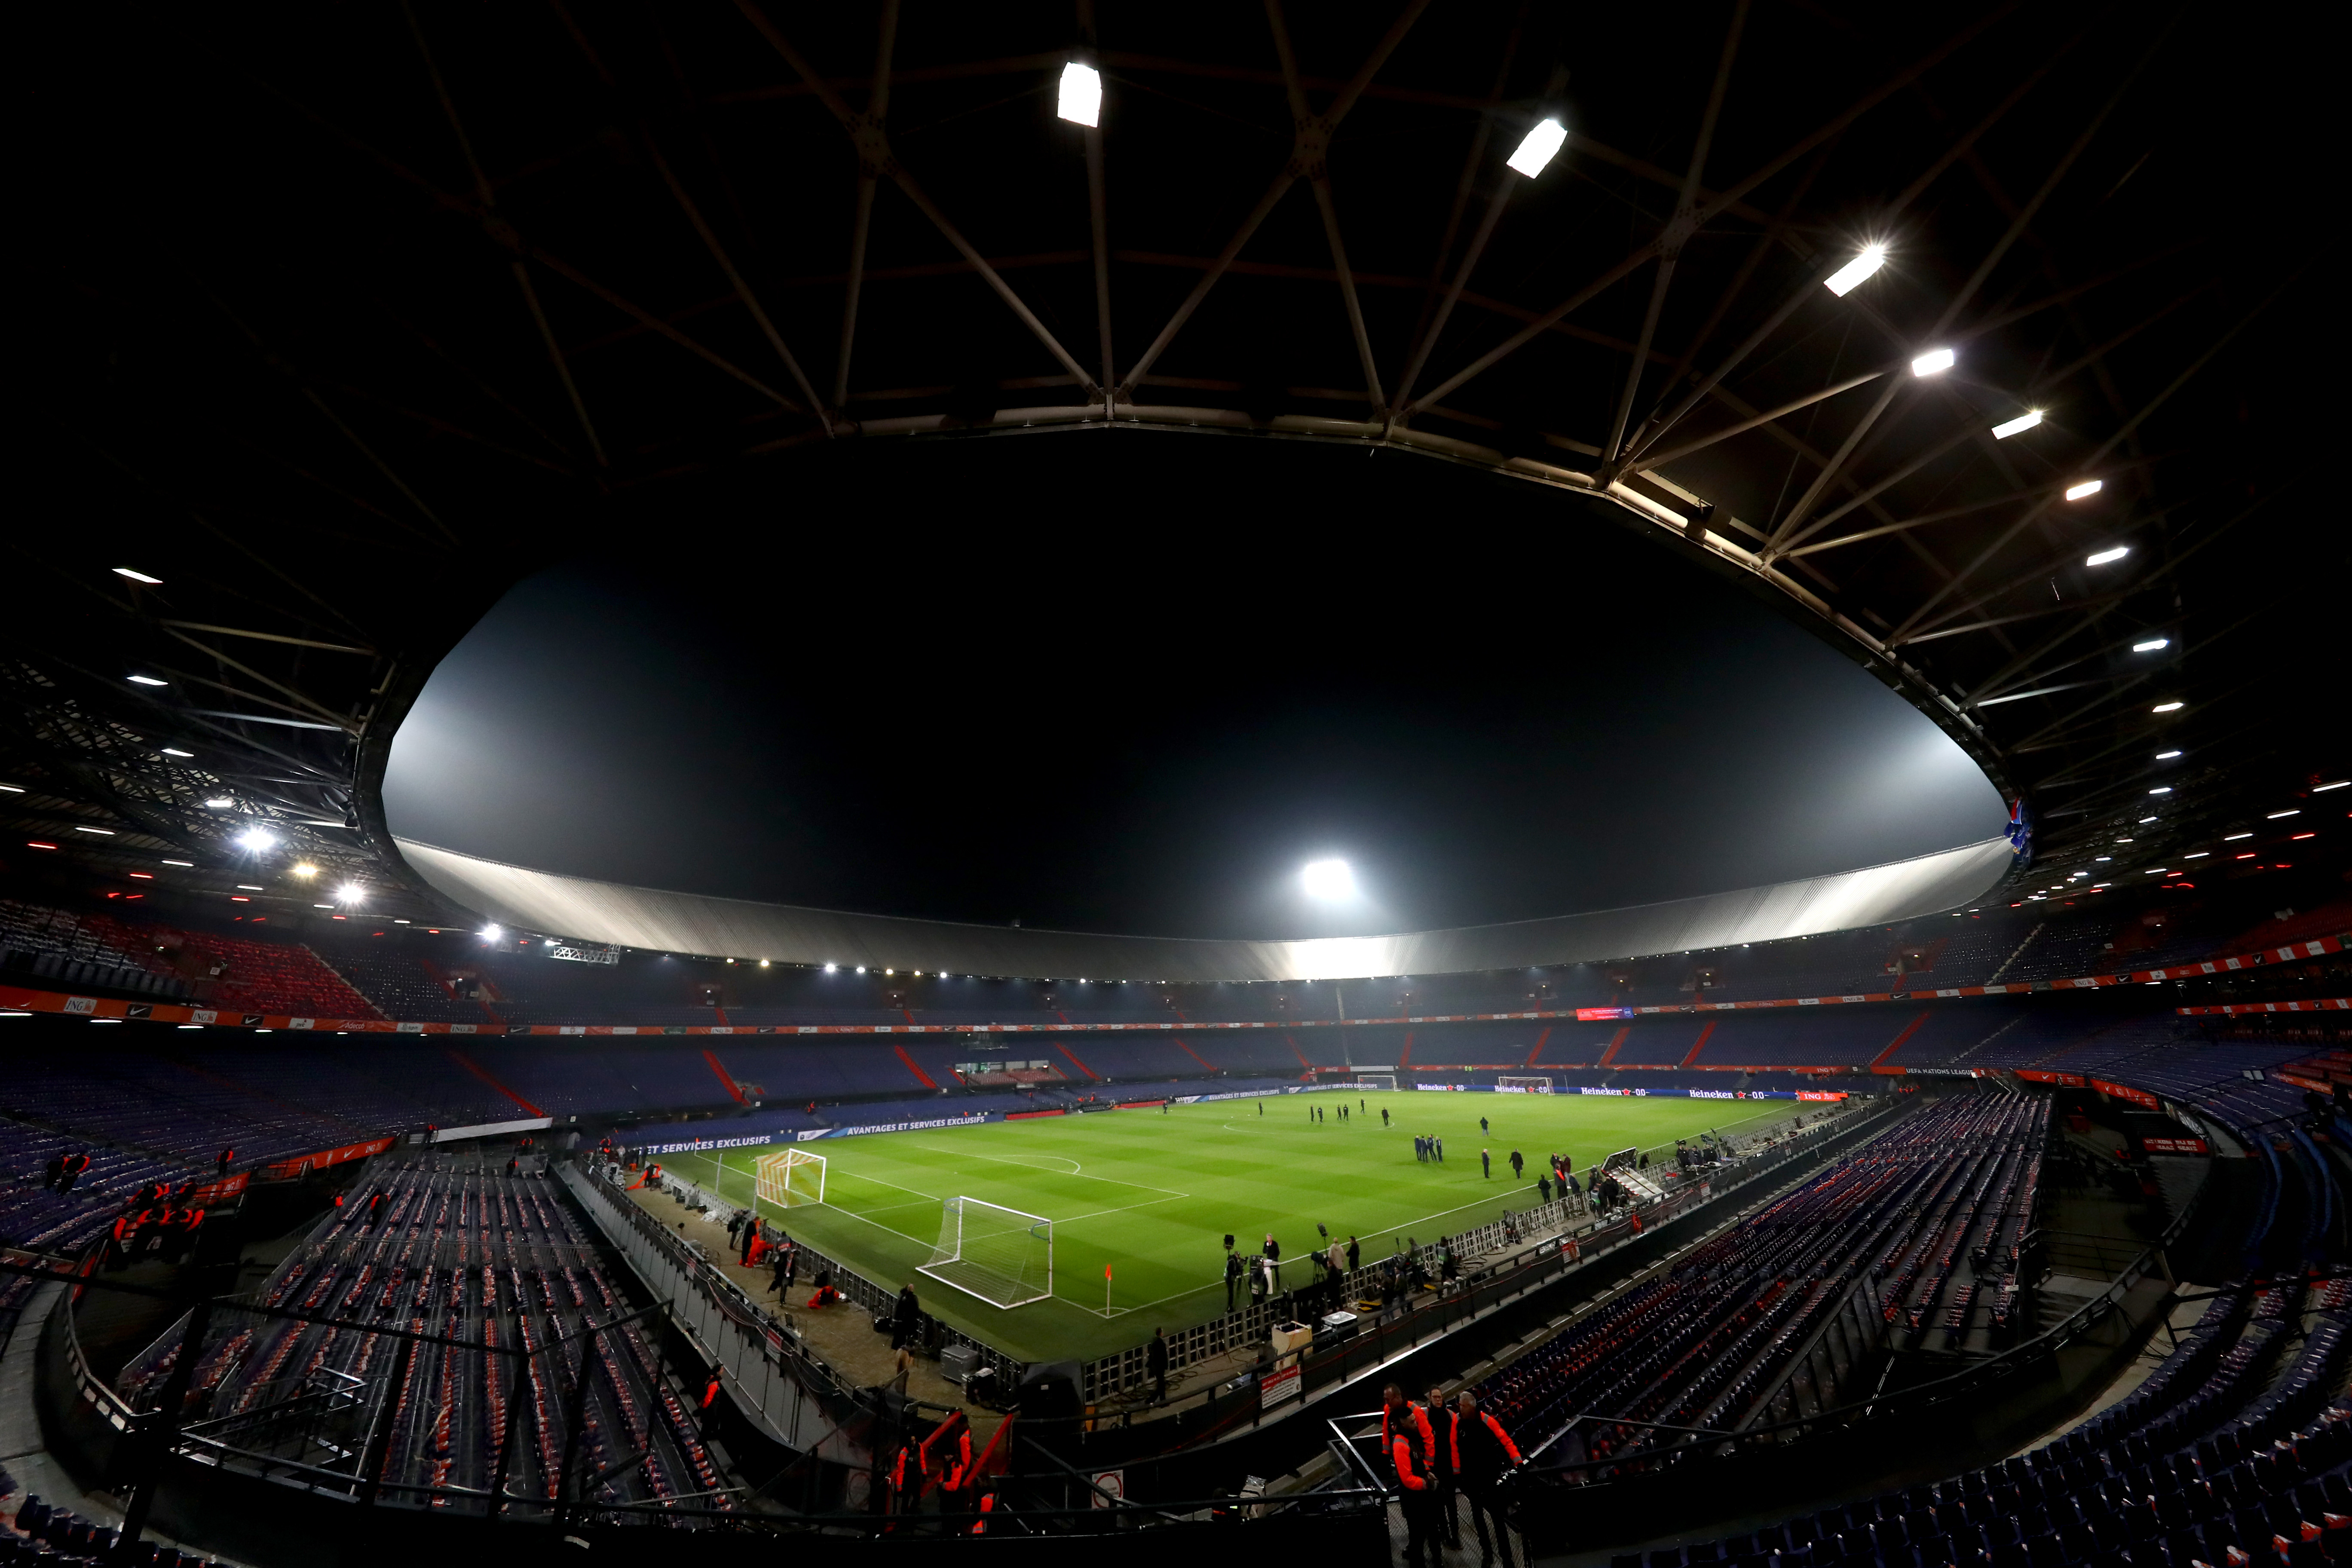 AMSTERDAM, NETHERLANDS - NOVEMBER 16:  General view inside the stadium prior to the UEFA Nations League Group A match between Netherlands and France at the Stadion Feijenoord on November 16, 2018 in Amsterdam, Netherlands.  (Photo by Dean Mouhtaropoulos/Getty Images)